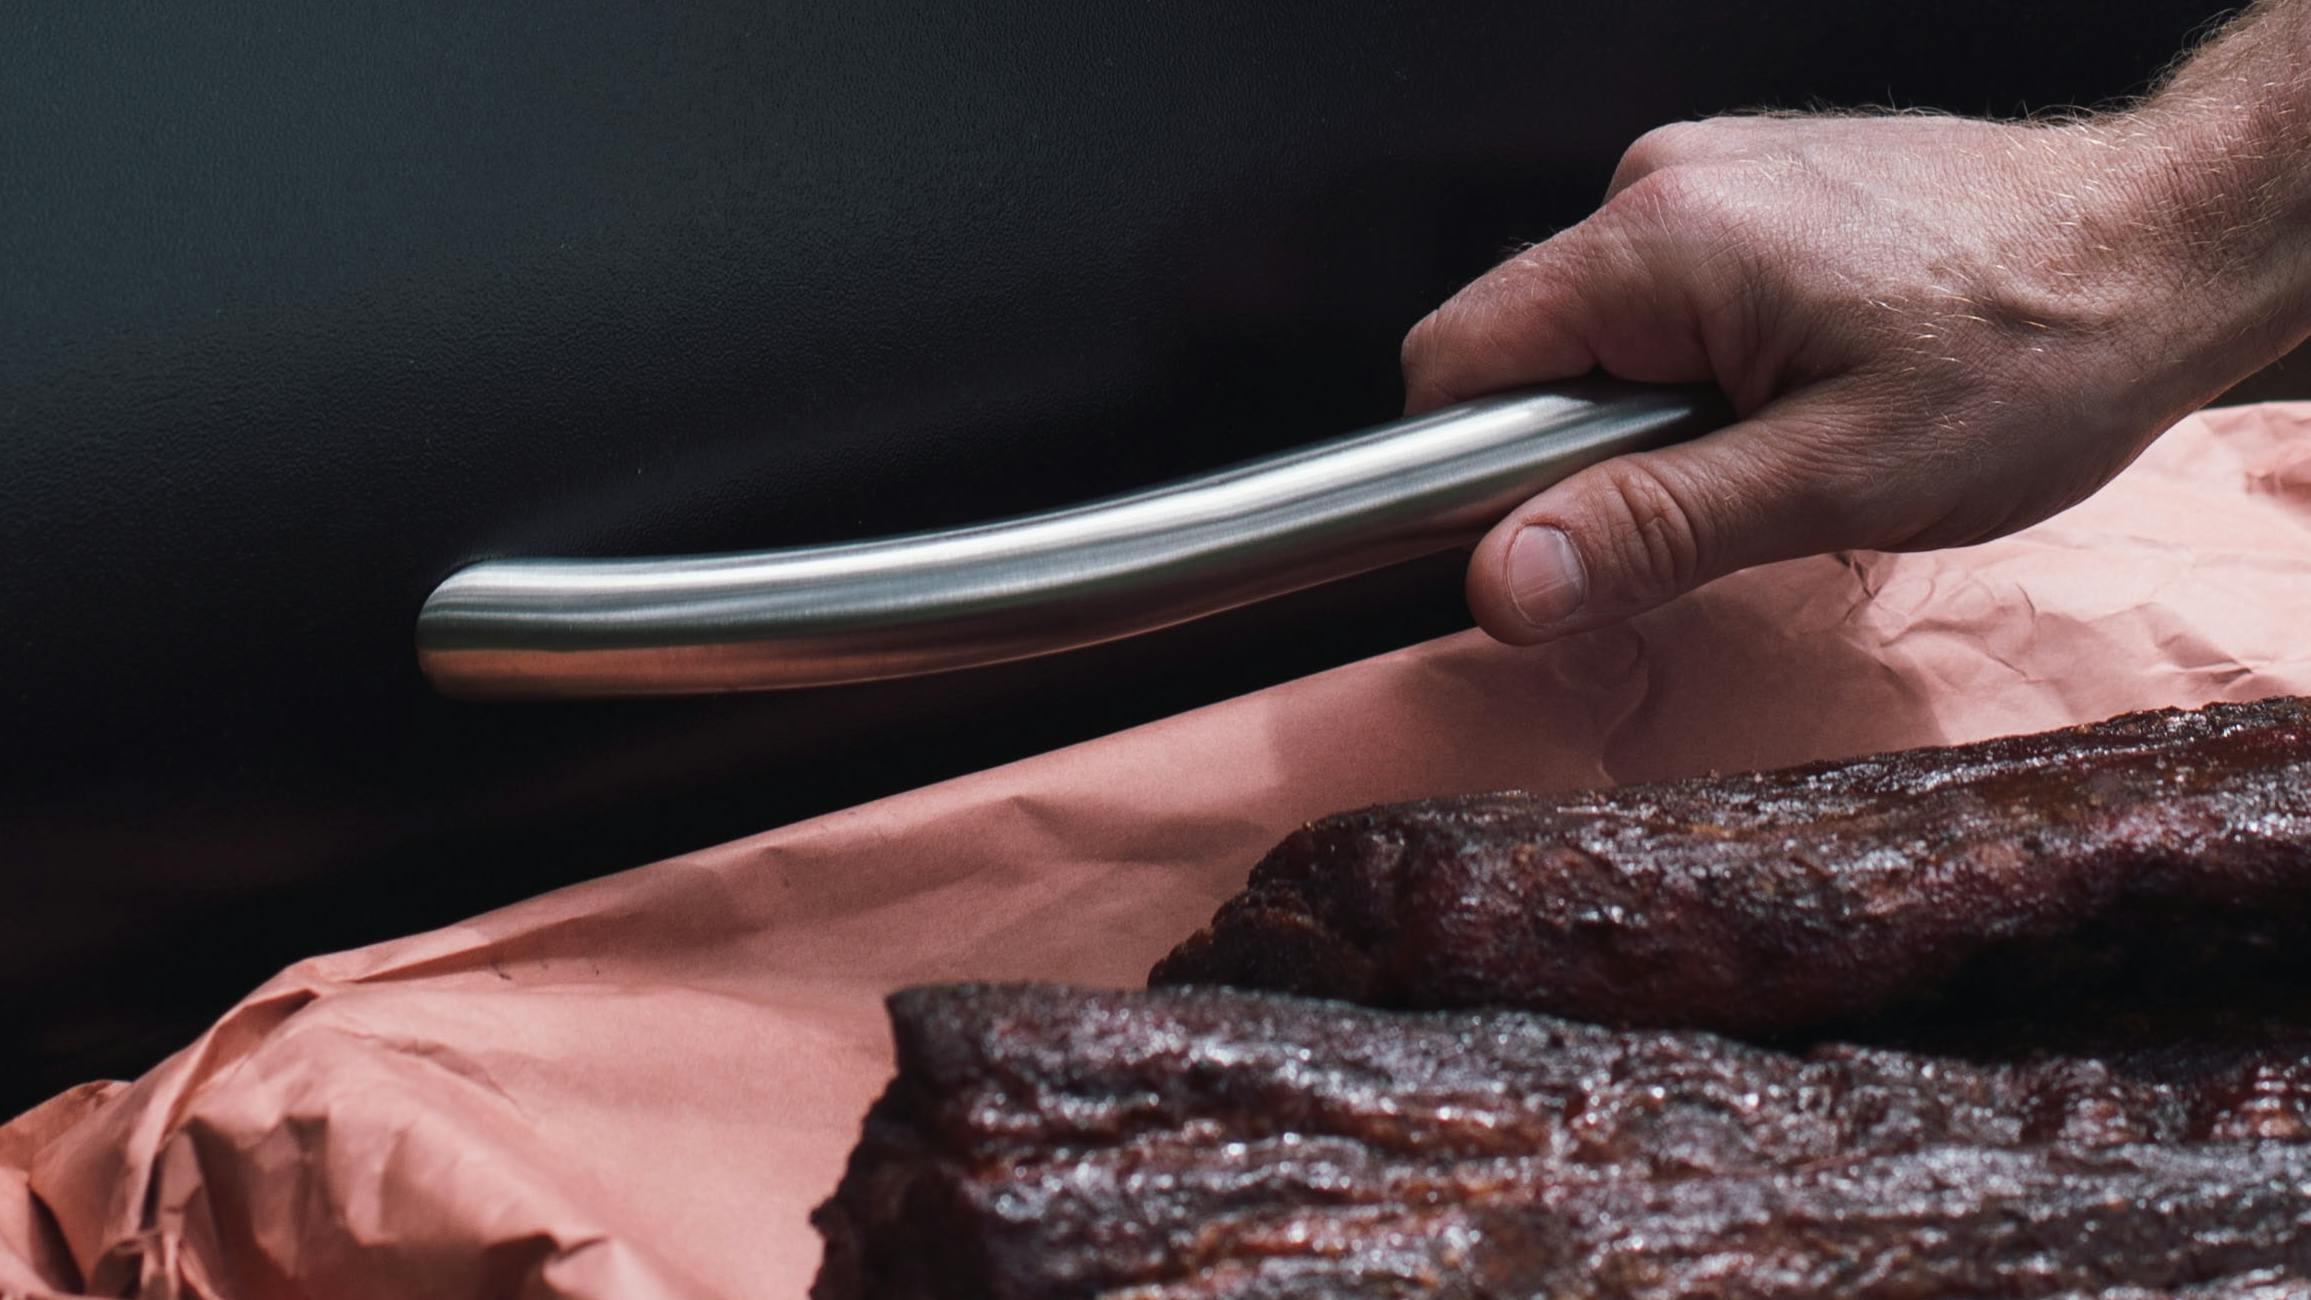 A hand opens a pellet grill with one hand while holding a board of meat with the other hand.